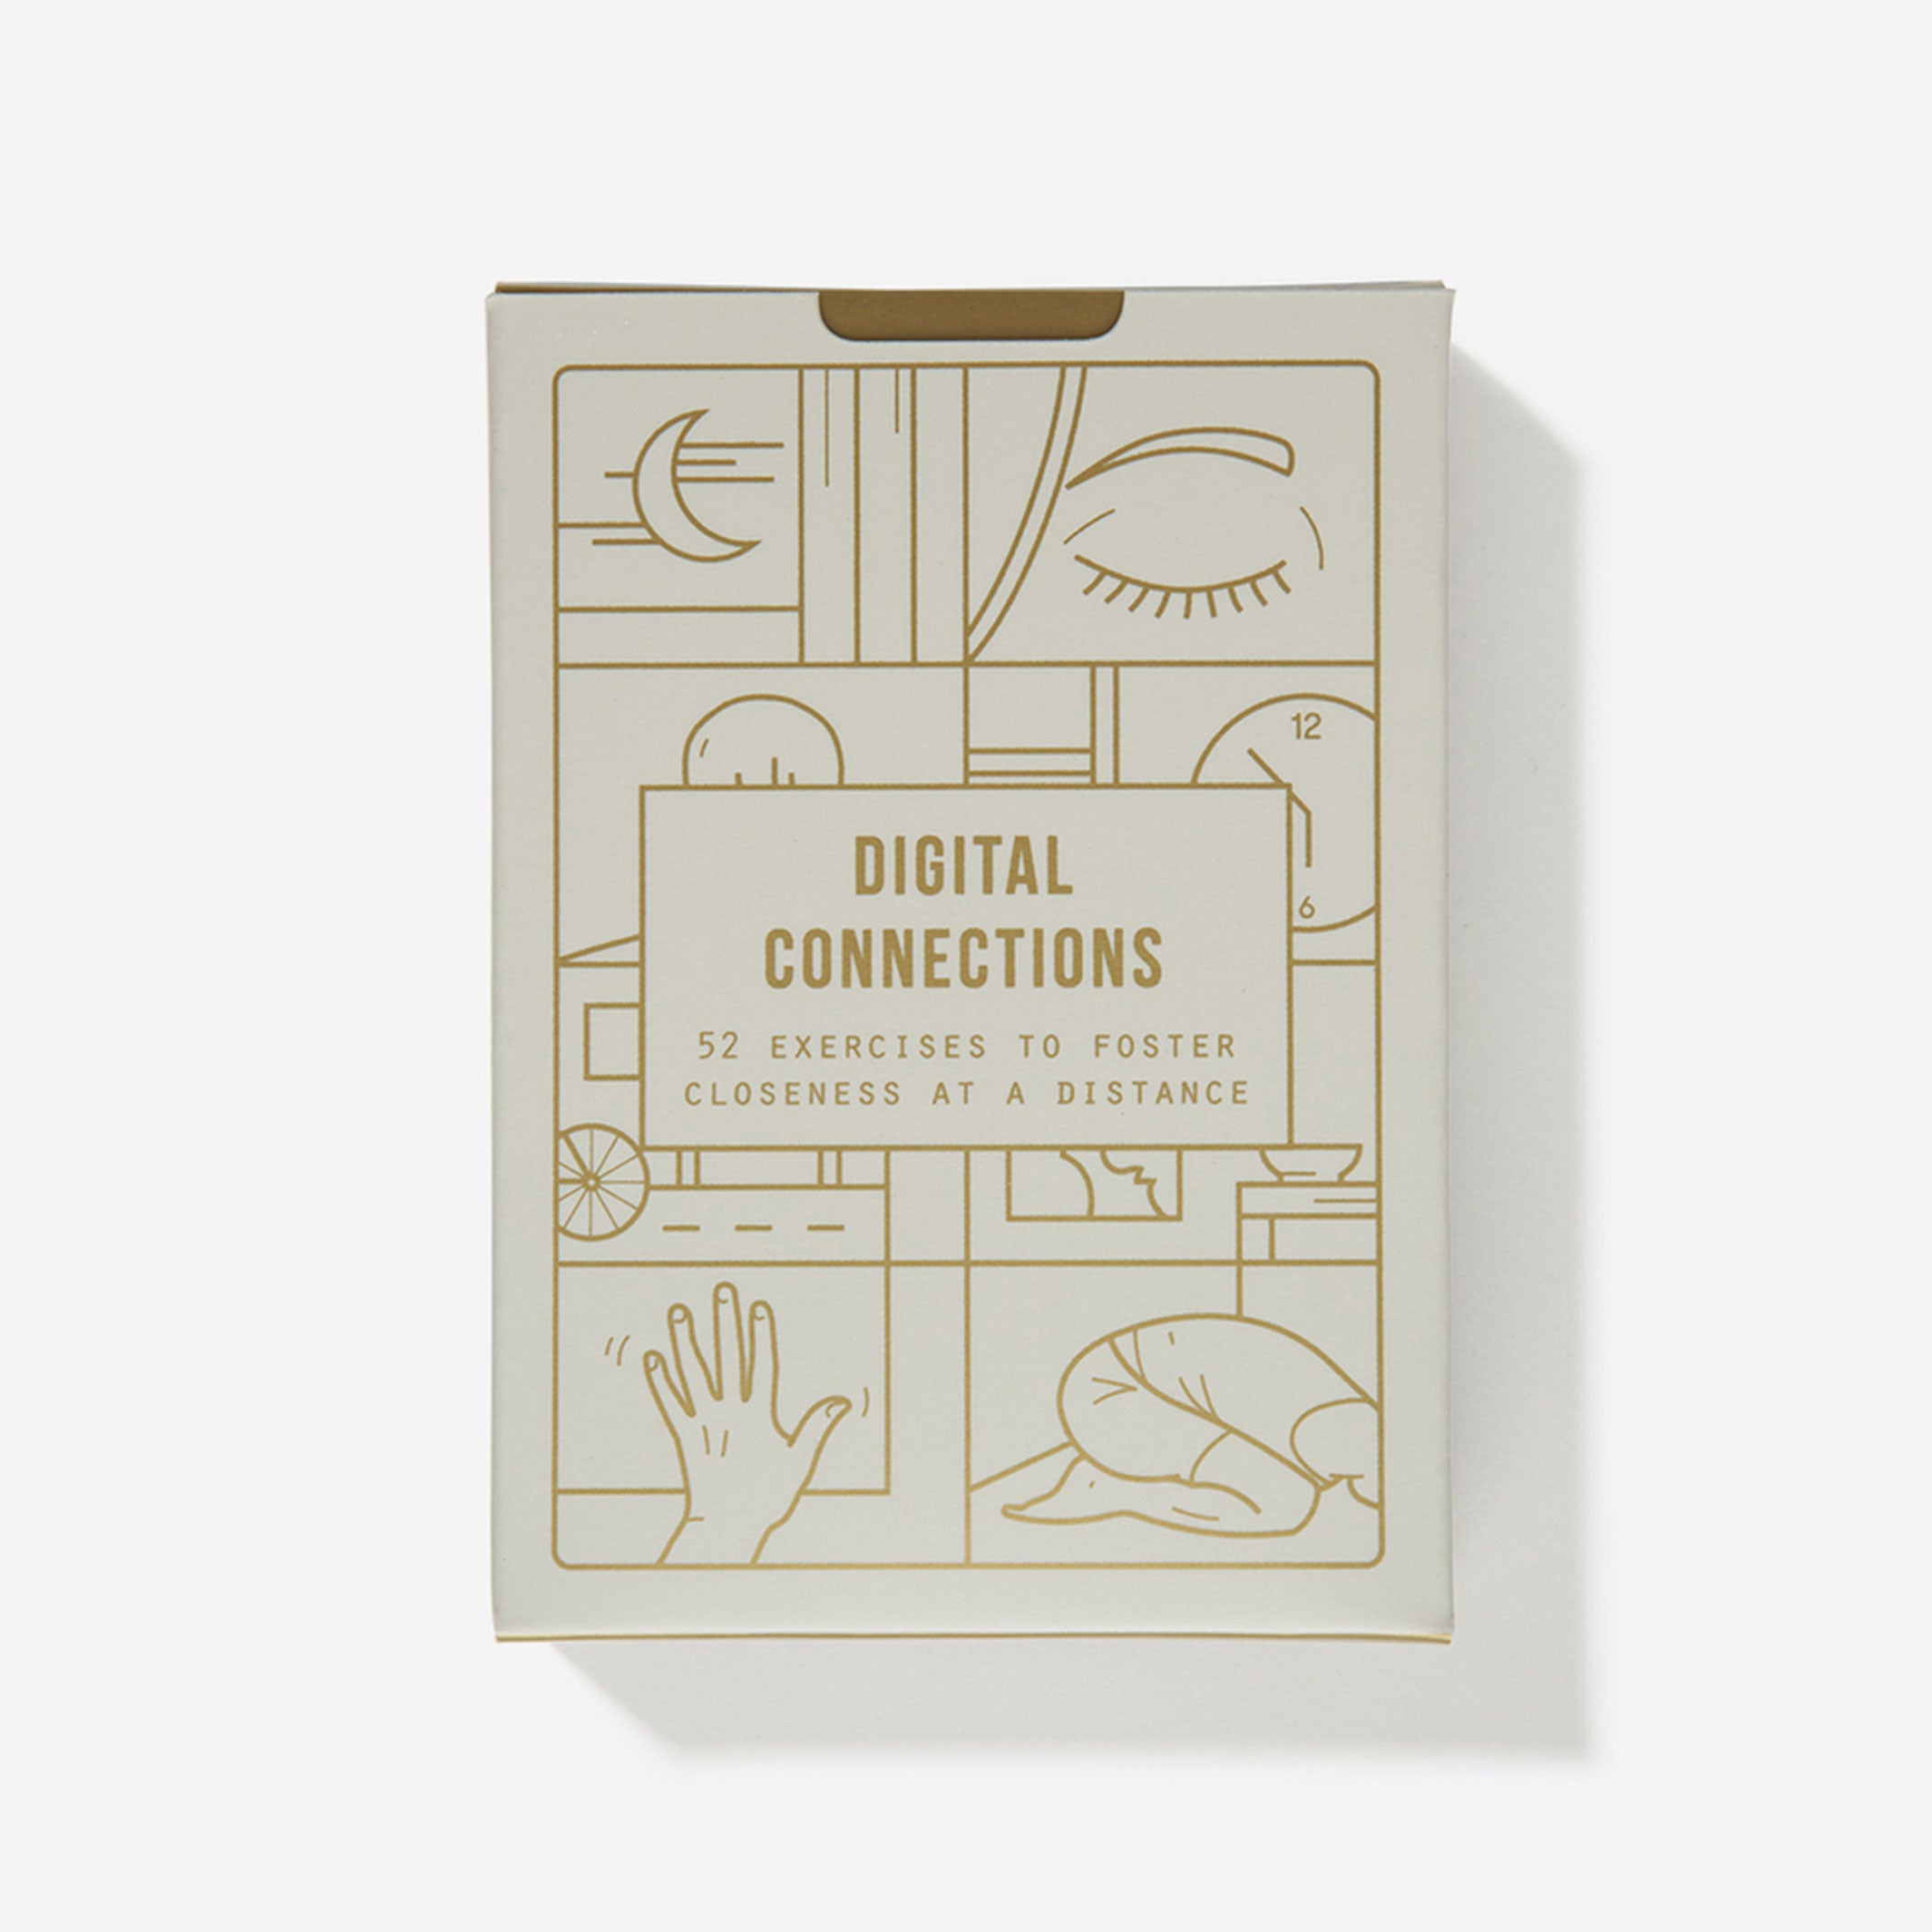 DIGITAL CONNECTIONS | CARD GAME to foster Closeness at a Distance | English Edition | The School of Life